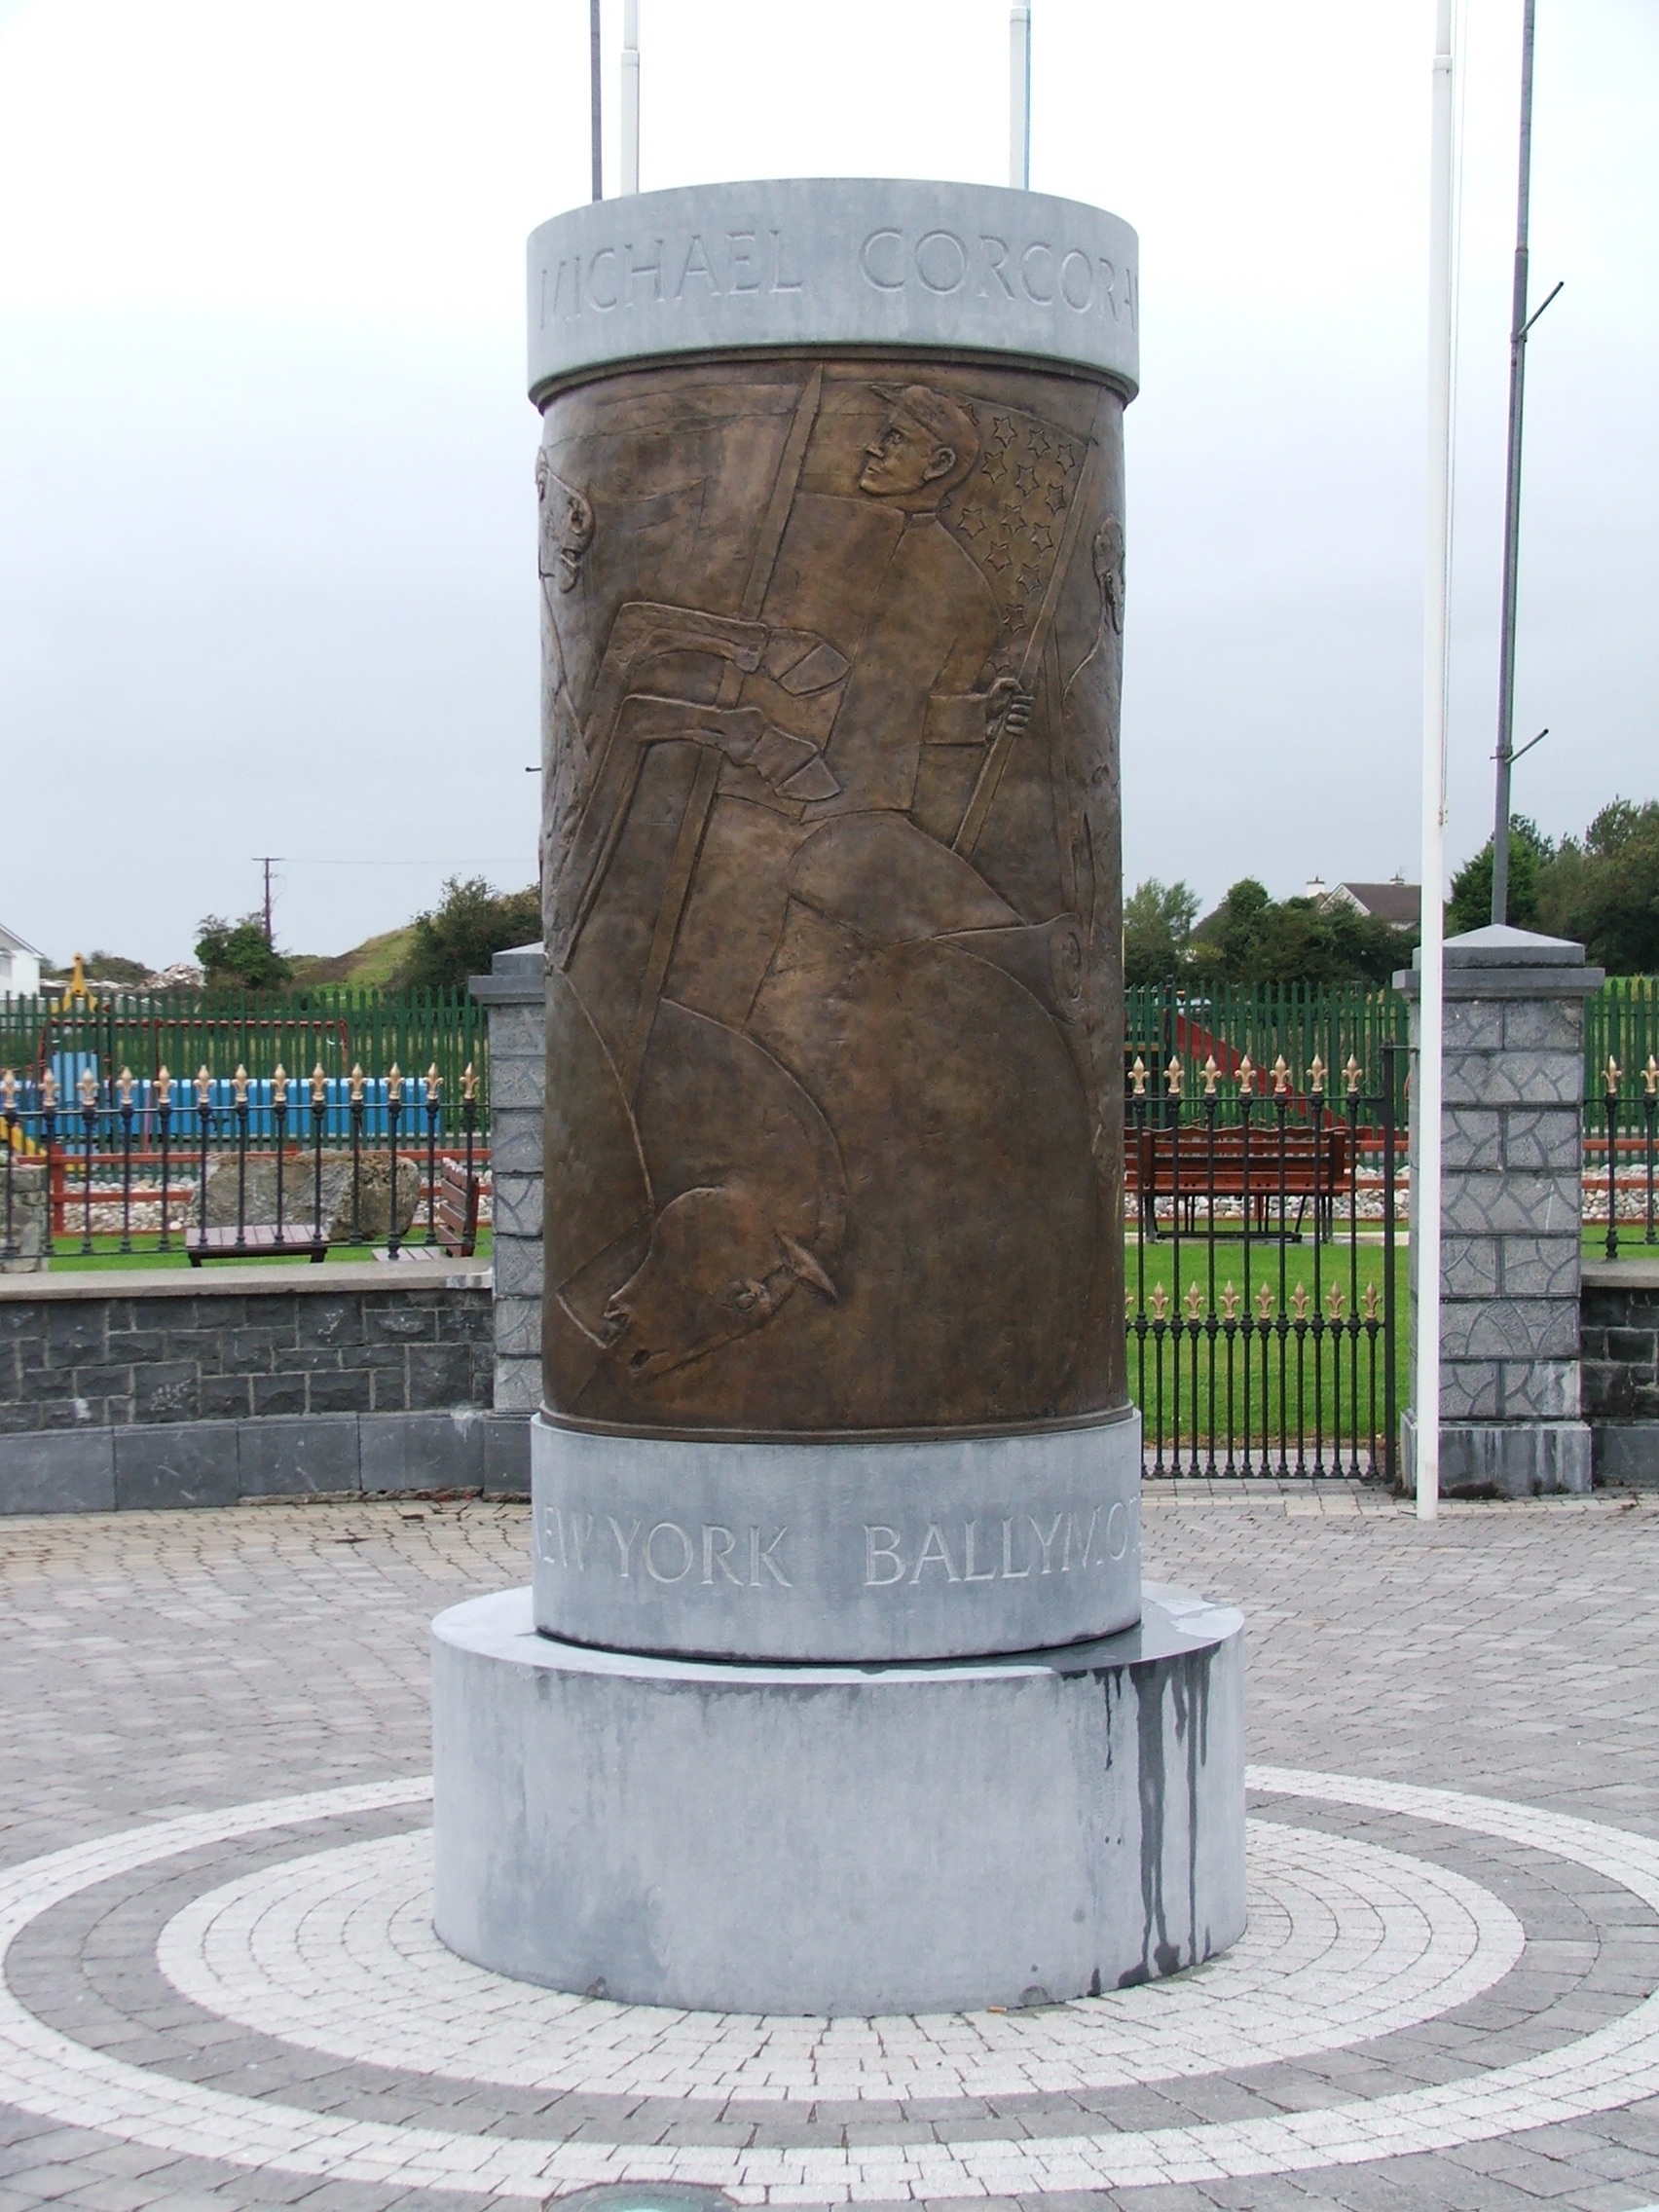 National Memorial to the Fighting 69th - Ballymote, Ireland